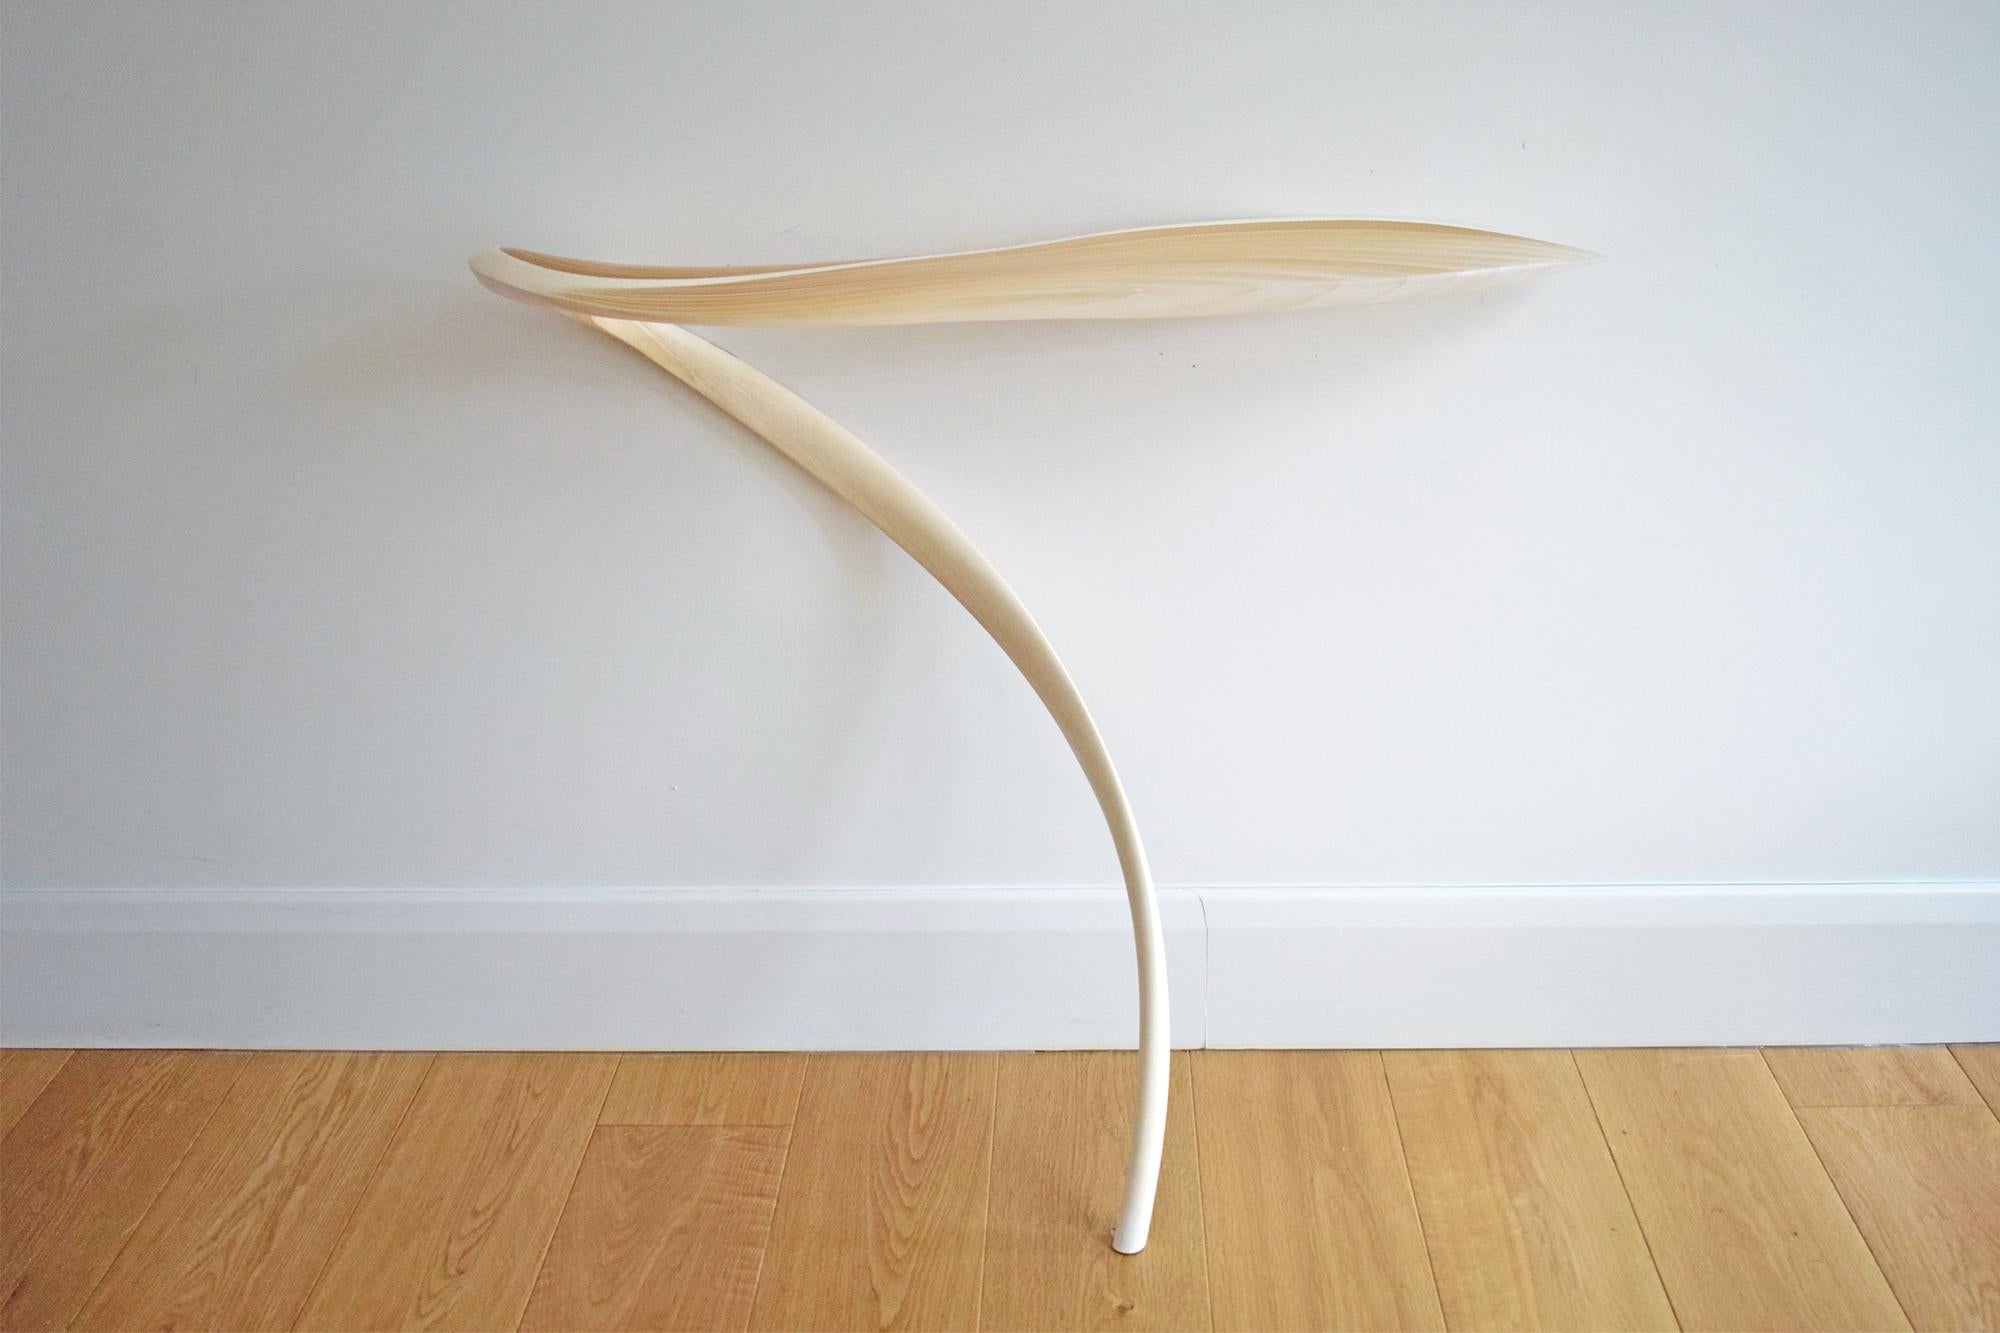 Ethereal console tables by International Artist Marc Fish. Available either right or left handed. Made from sycamore and resin in a very organic sculptural form. Elegant and sinuous the piece shows real grace but also an unequivocal energy. The